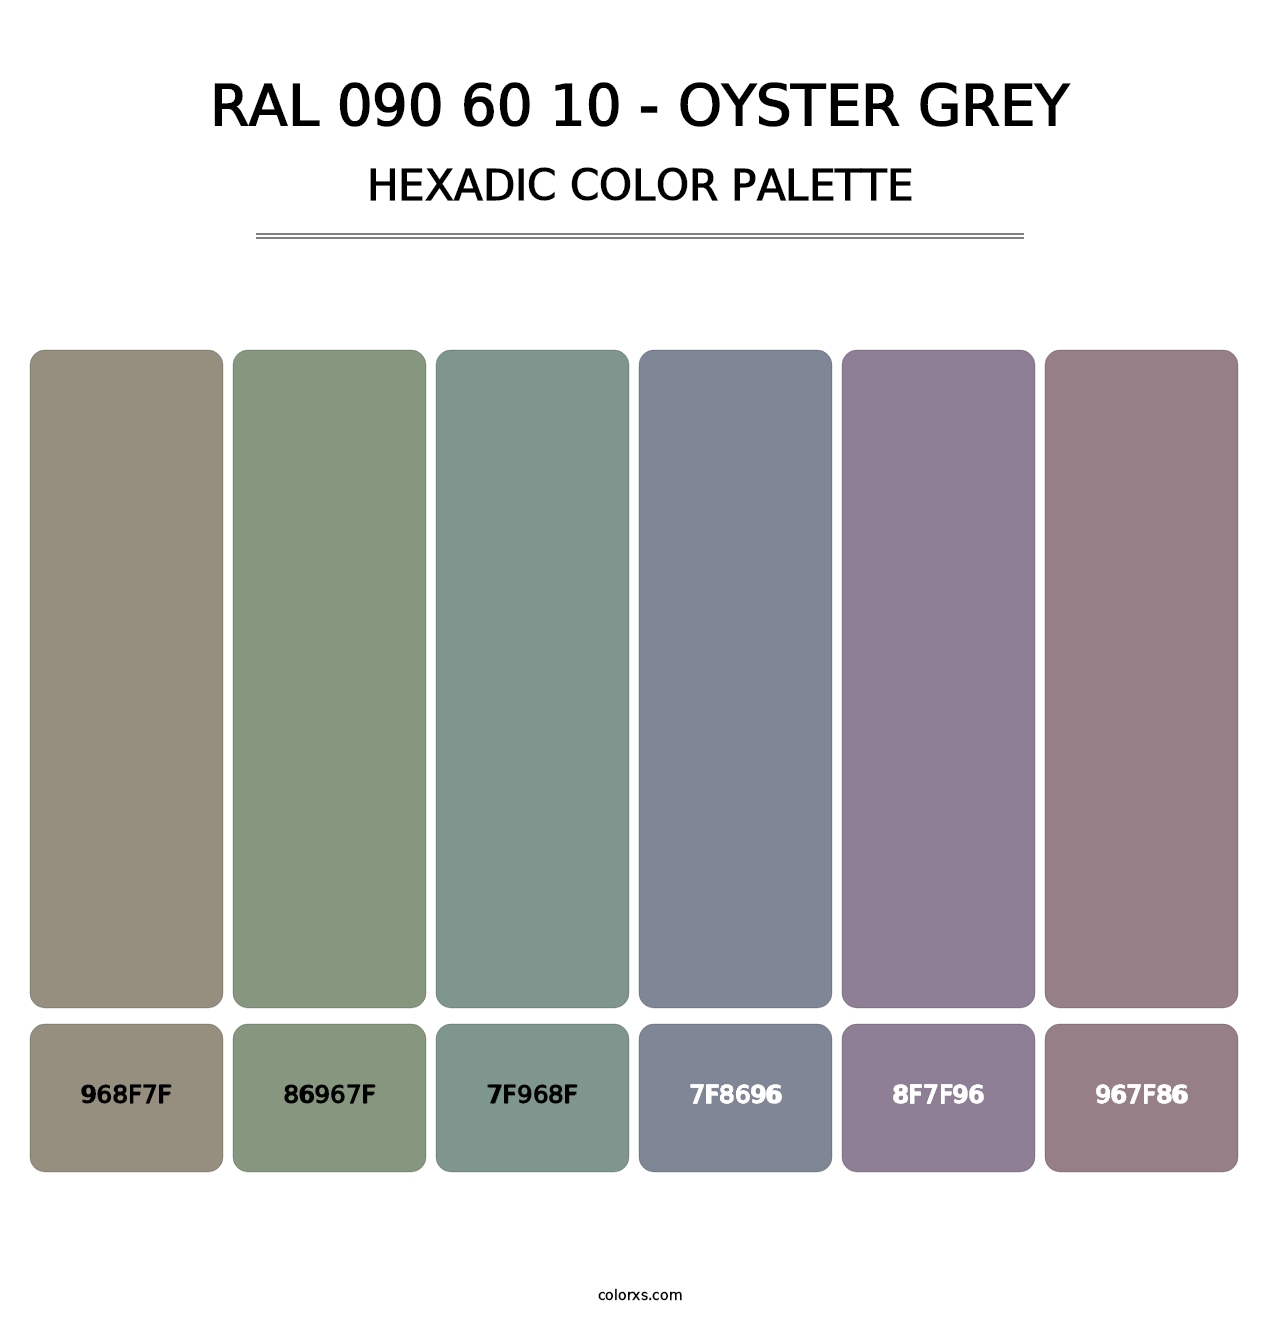 RAL 090 60 10 - Oyster Grey - Hexadic Color Palette